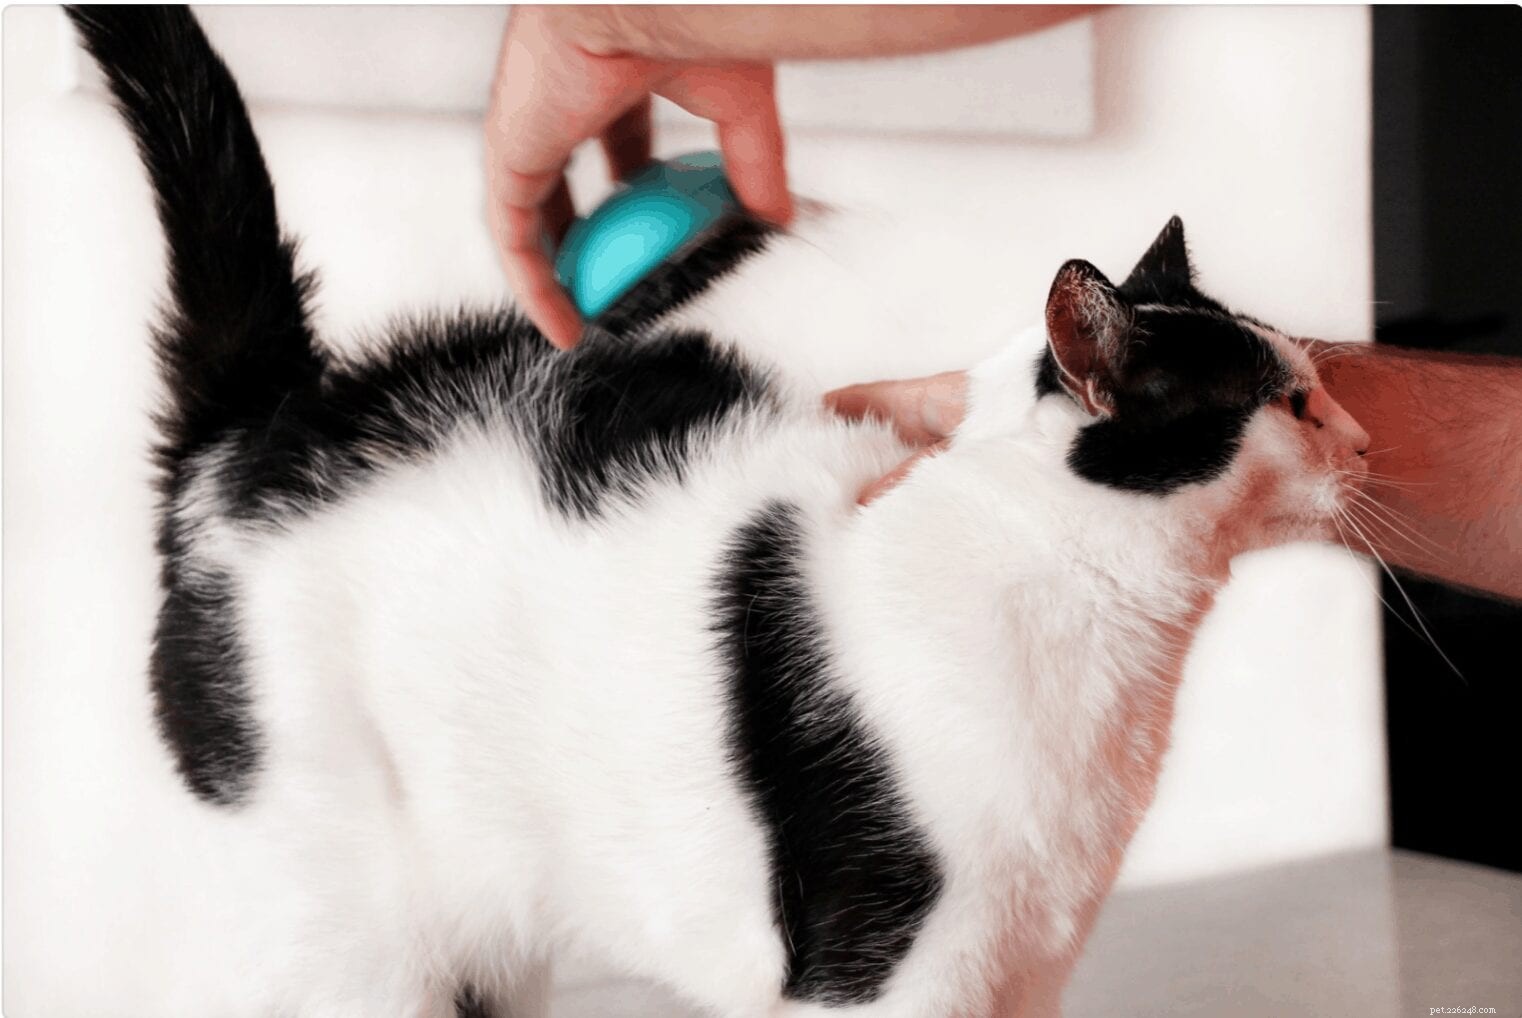 Cat Dandruff:Why It Happens and Ways to Help Your Kitty